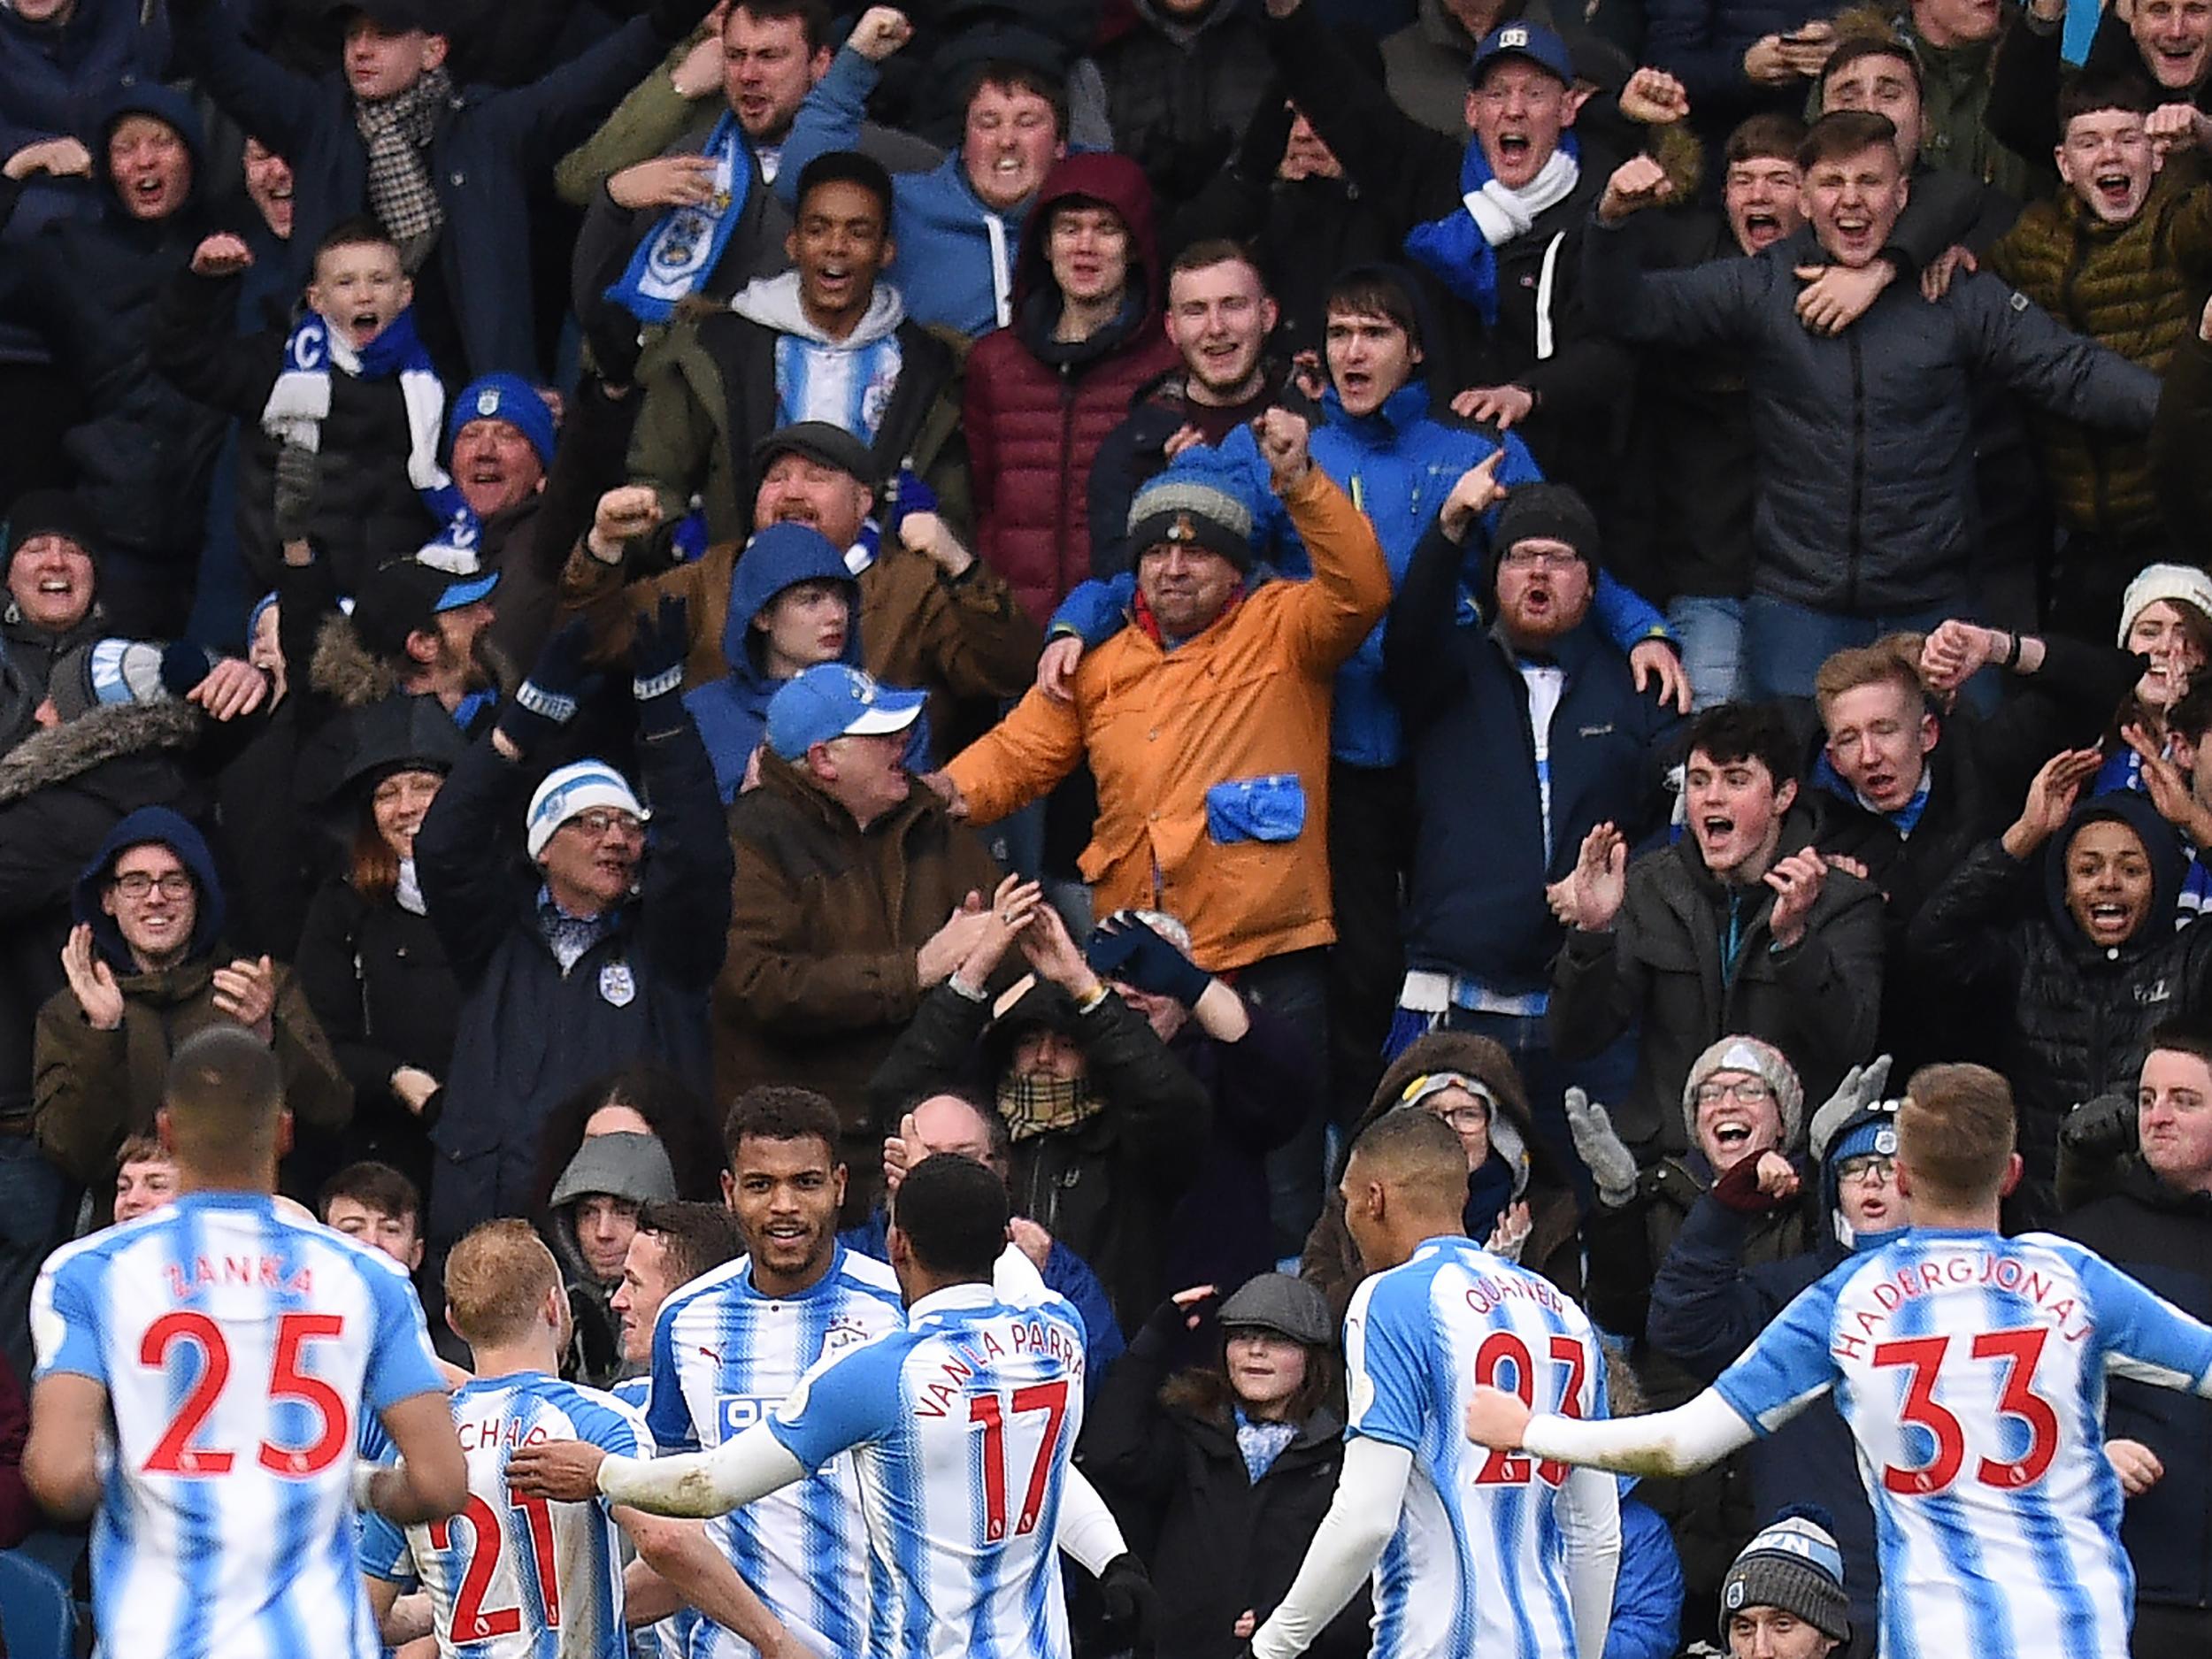 Huddersfield moved out of the relegation zone with the win